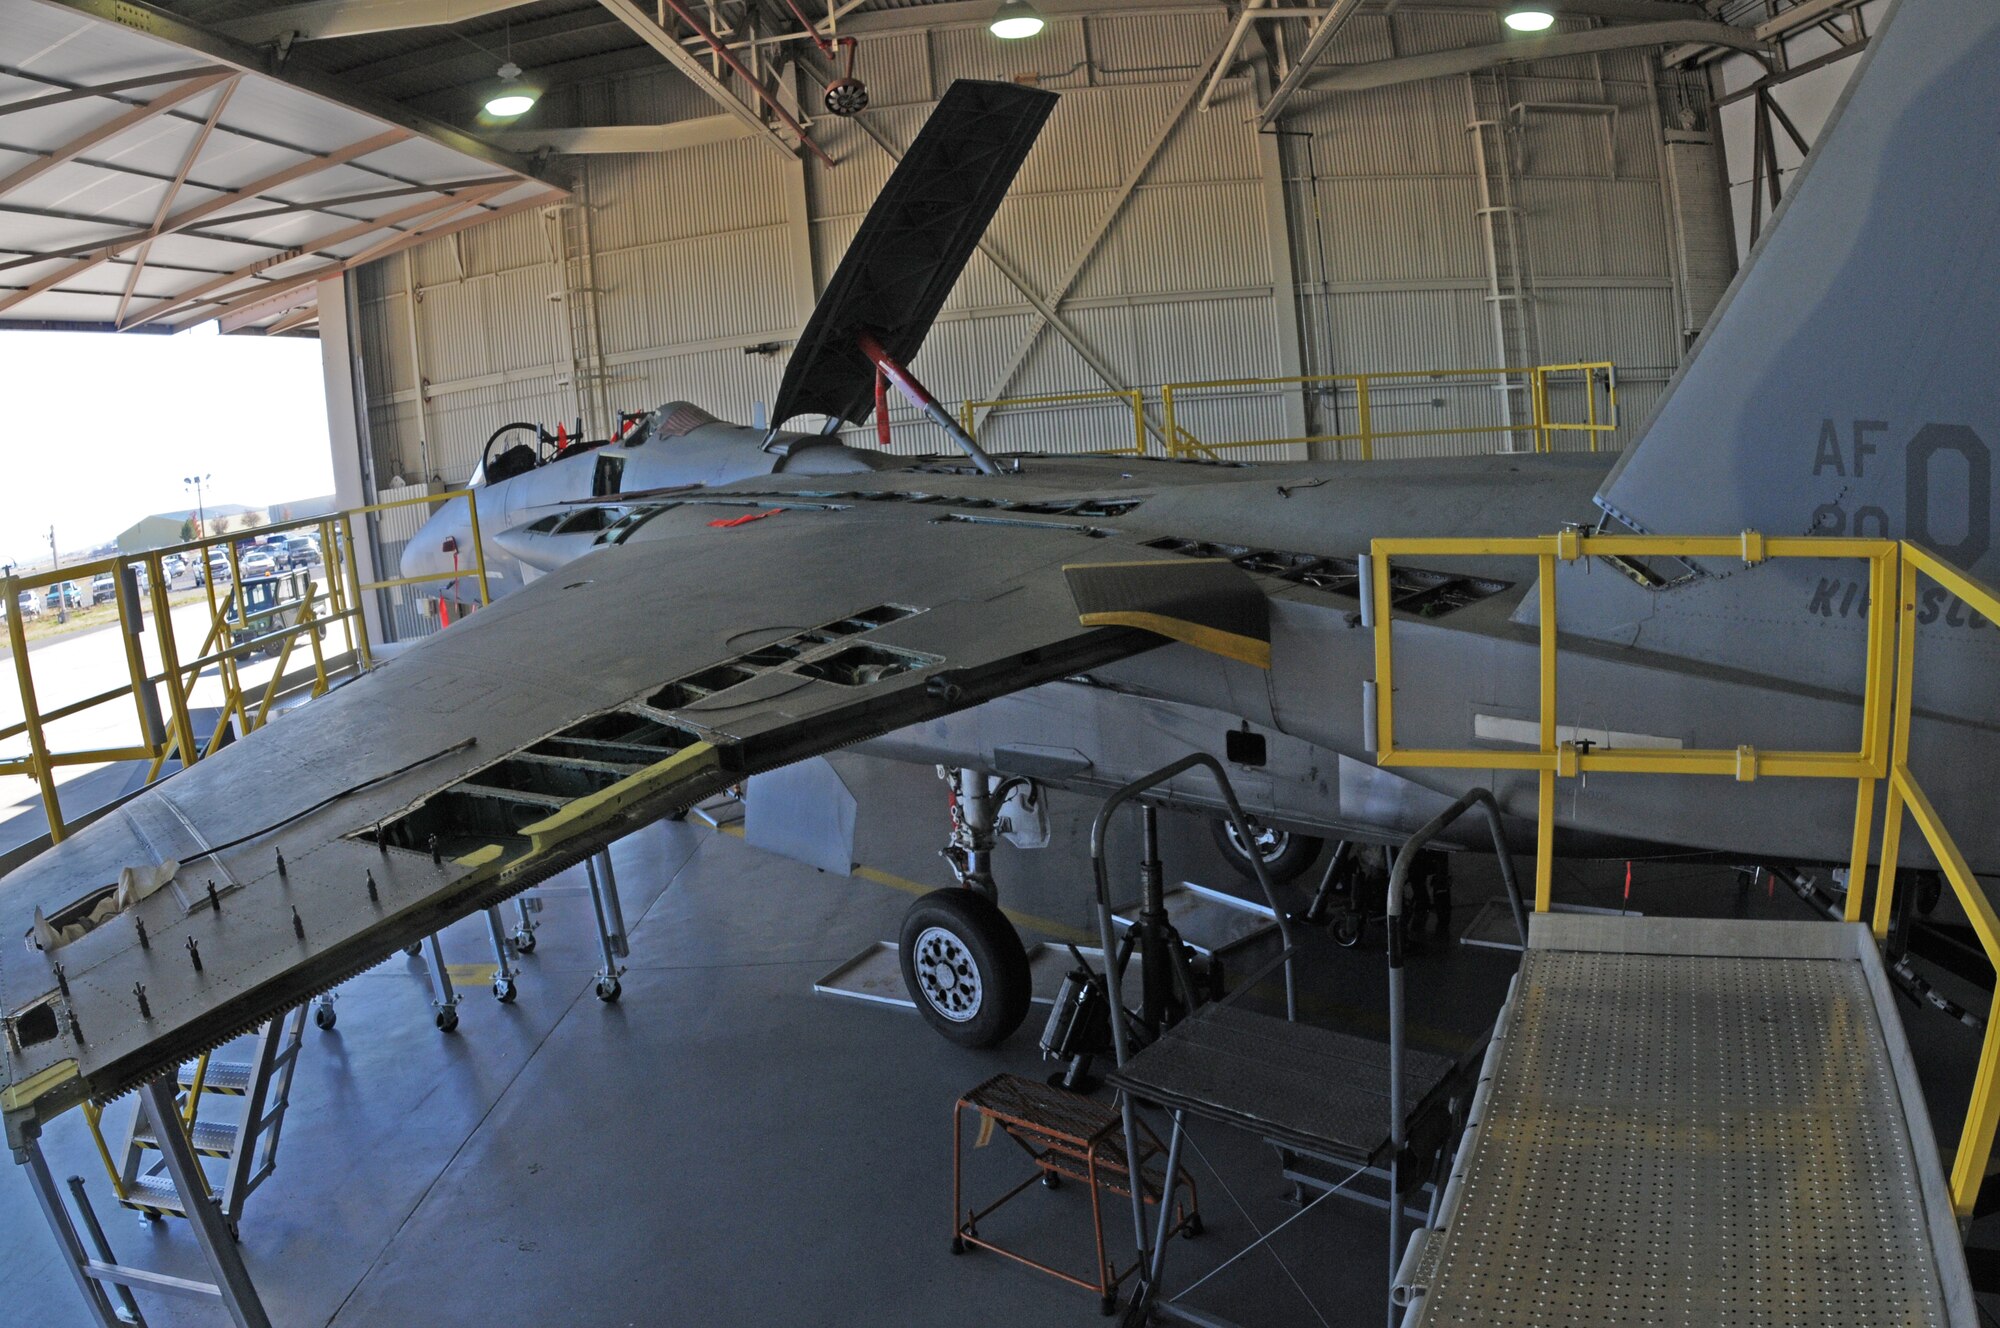 An Oregon Air National Guard F-15 Eagle from the 173rd Fighter Wing is almost unrecognizable as a fighter aircraft with multiple pieces missing from its body while sitting in the hangar at Kingsley Field, in Klamath Falls, Ore. Oct. 16, 2014.  This aircraft is going through phase maintenance where the 173rd FW maintainers closely inspect the aircraft for cracks and other types of damage, verifying that the 30 plus year old aircraft is safe to fly.  (U.S. Air National Guard photo by Master Sgt. Jennifer Shirar/Released)    